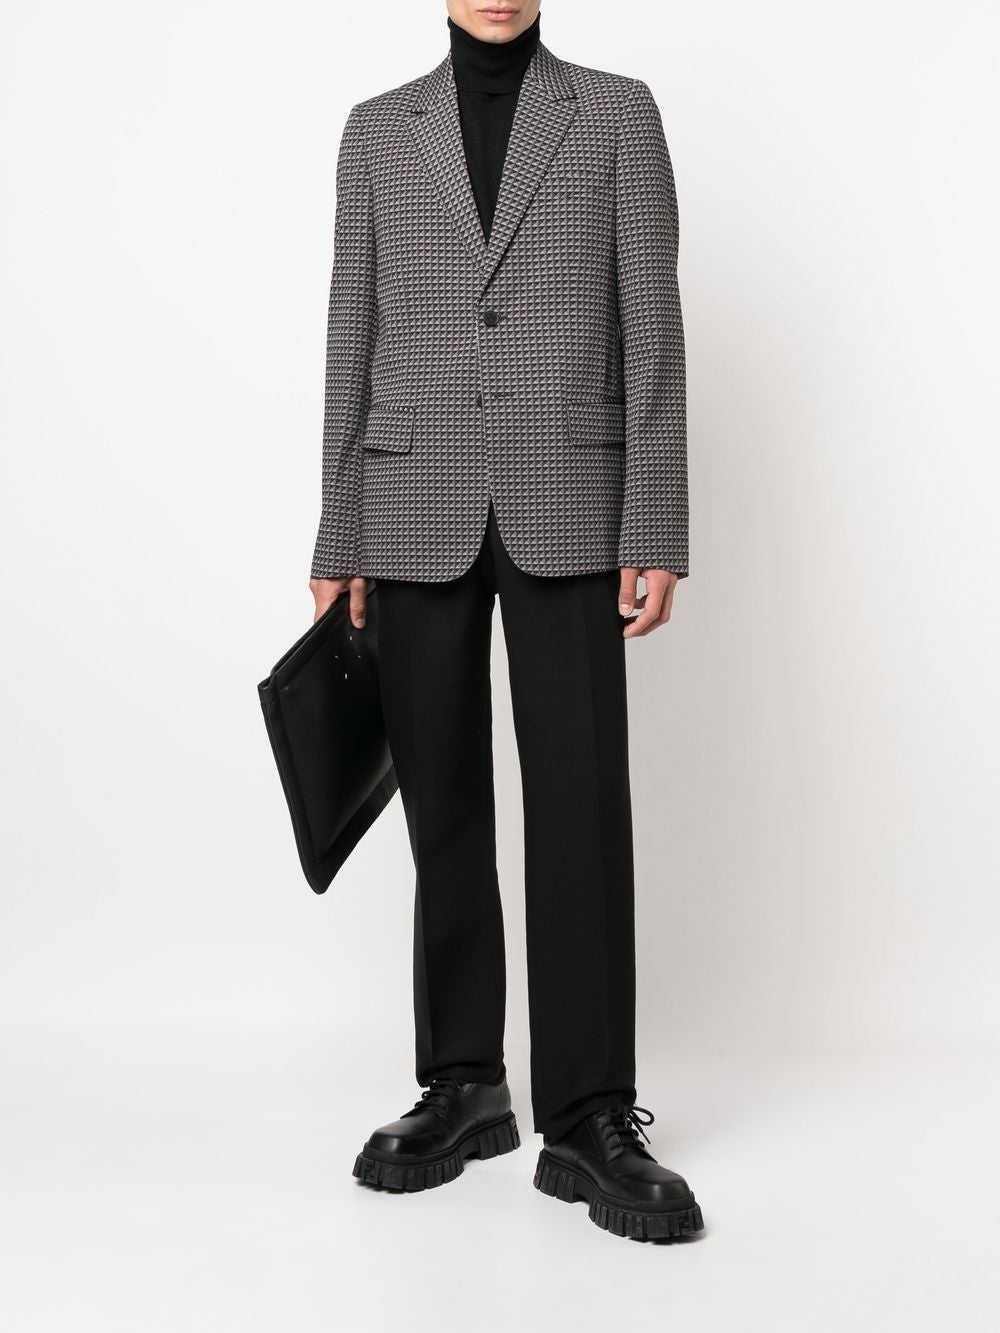 VALENTINO Men's Studded Wool Jacket for Fall/Winter 2022